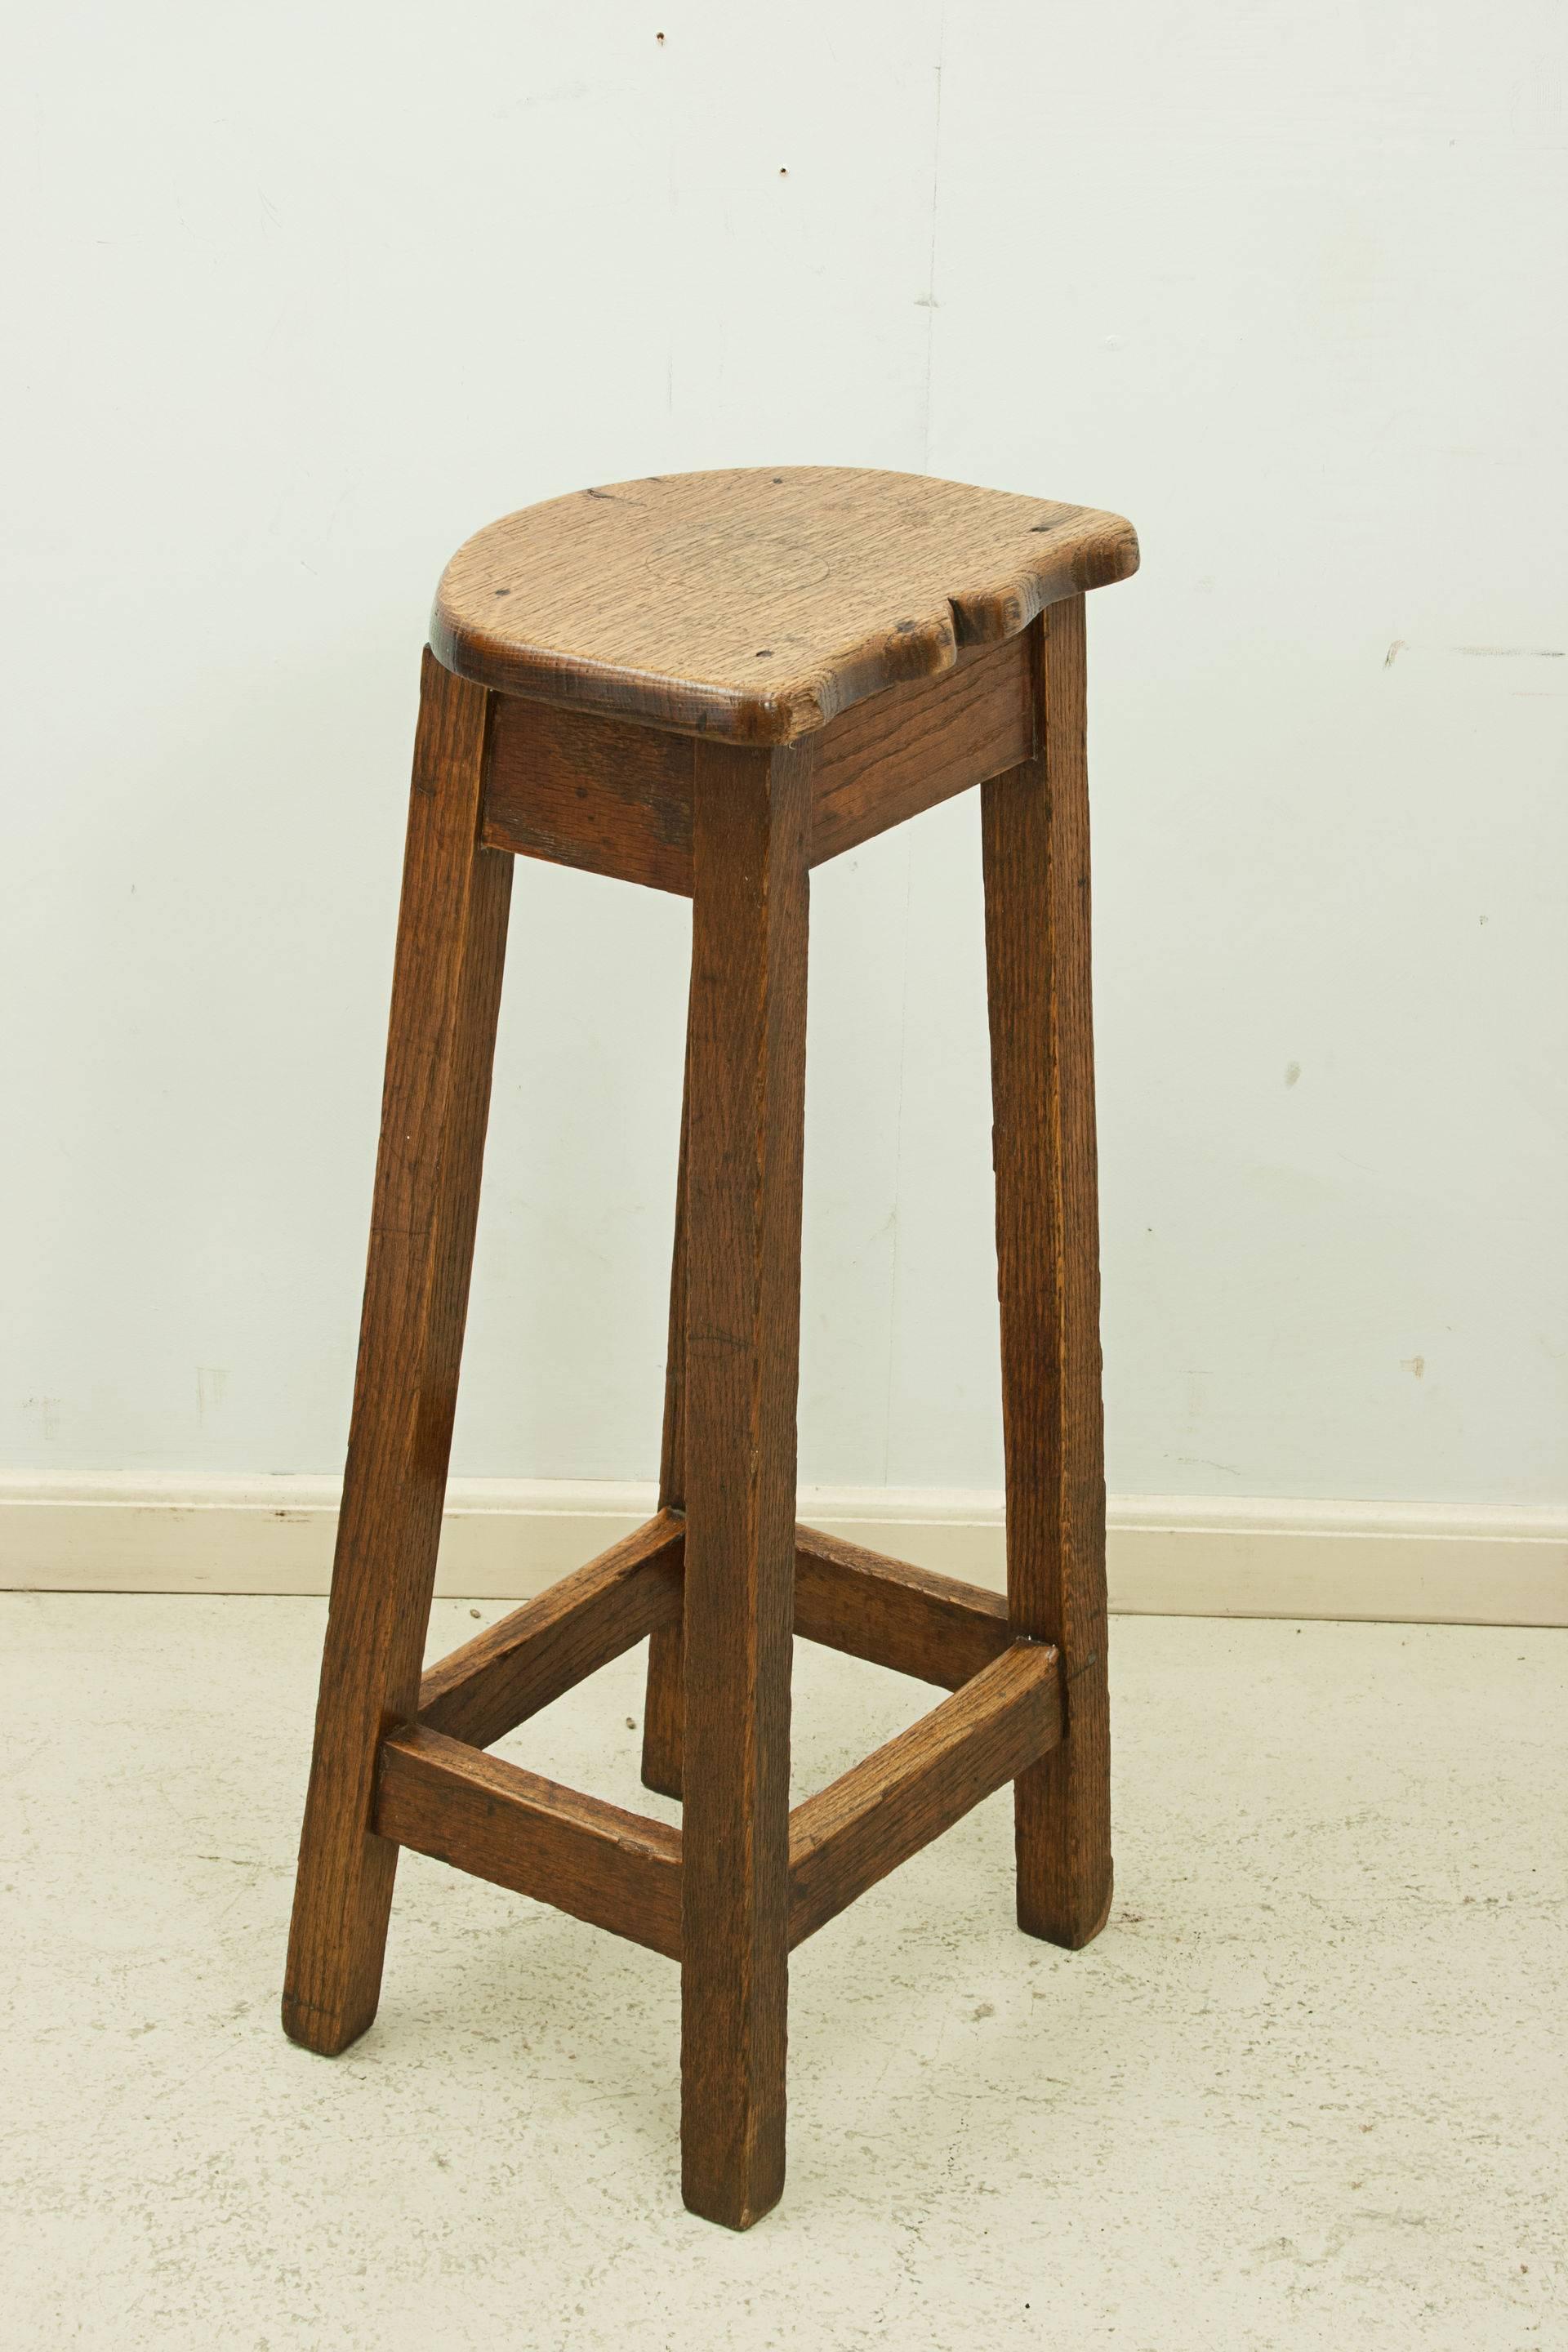 Oak bar stool.
A strong and compact oak bar stool with a shaped seat. This type of stool is great for use as a kitchen stool in a breakfast bar eating area. Also ideal for use in a bar or cafe.